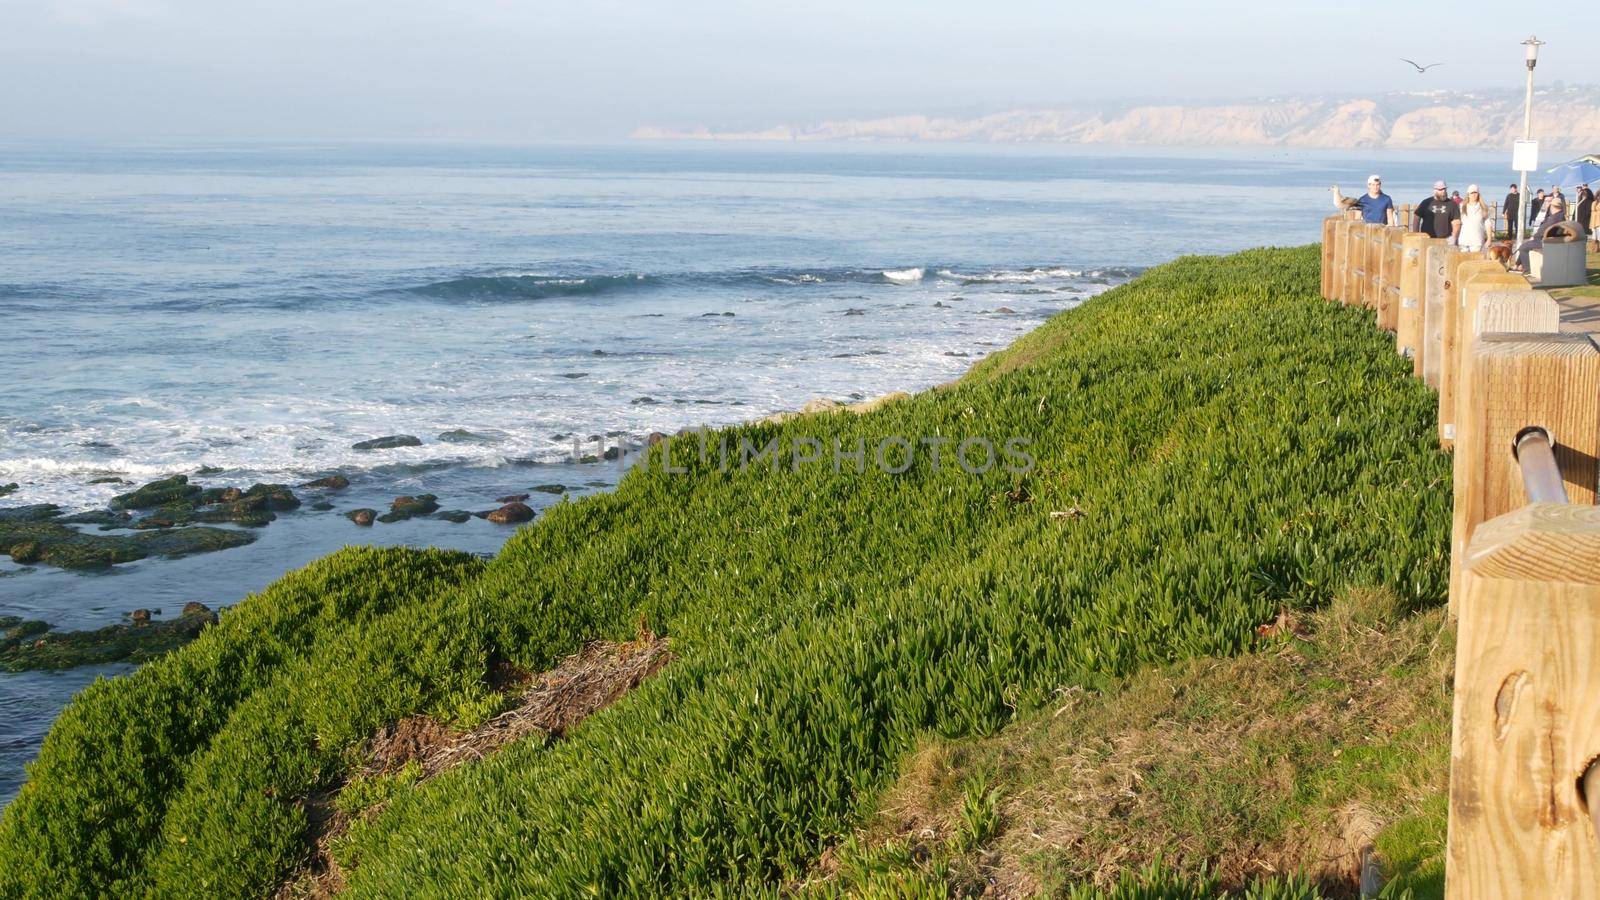 La Jolla, San Diego, CA USA -24 JAN 2020: Group of people walking on steep high cliff promenade, multiethnic pedestrians, tourists during holidays. Succulents and ocean, golden sunset in California.